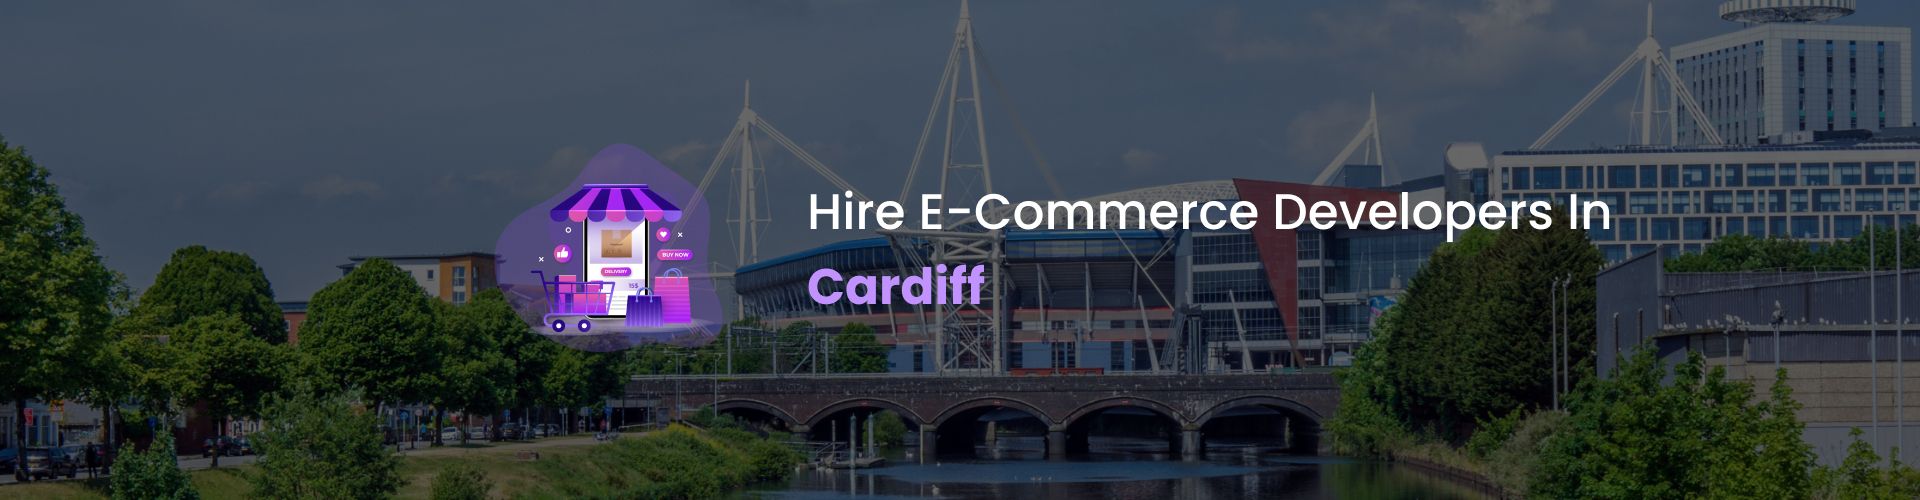 hire ecommerce developers in cardiff